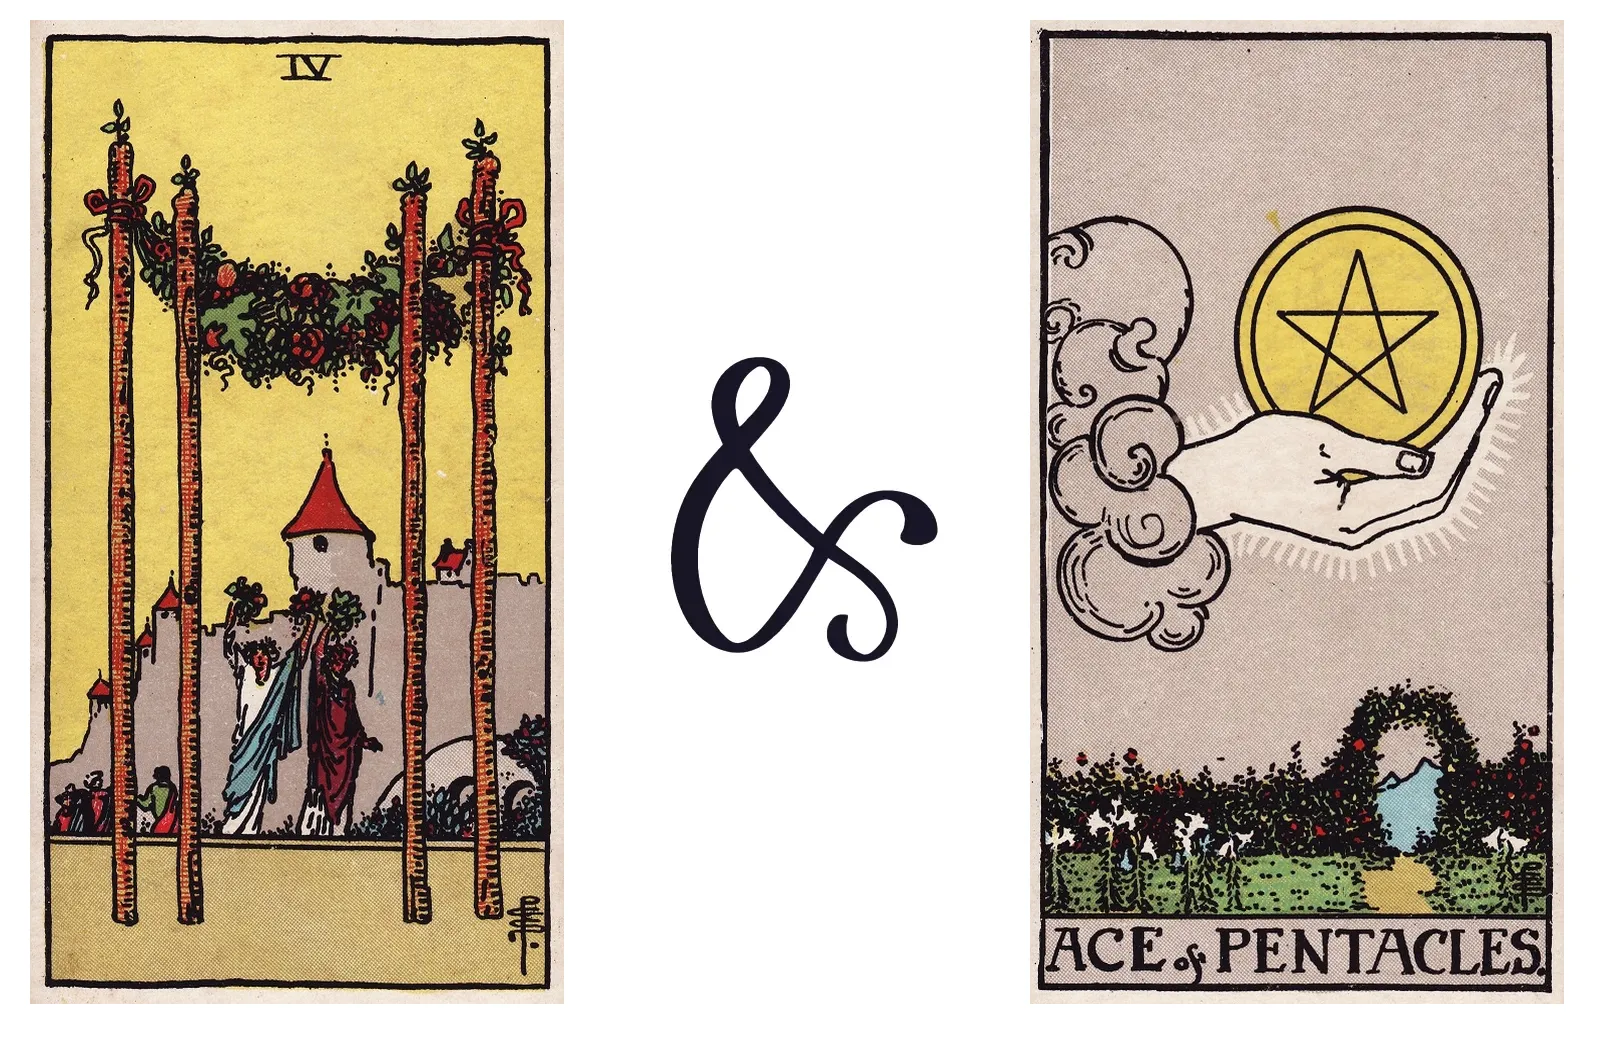 Four of Wands and Ace of Pentacles